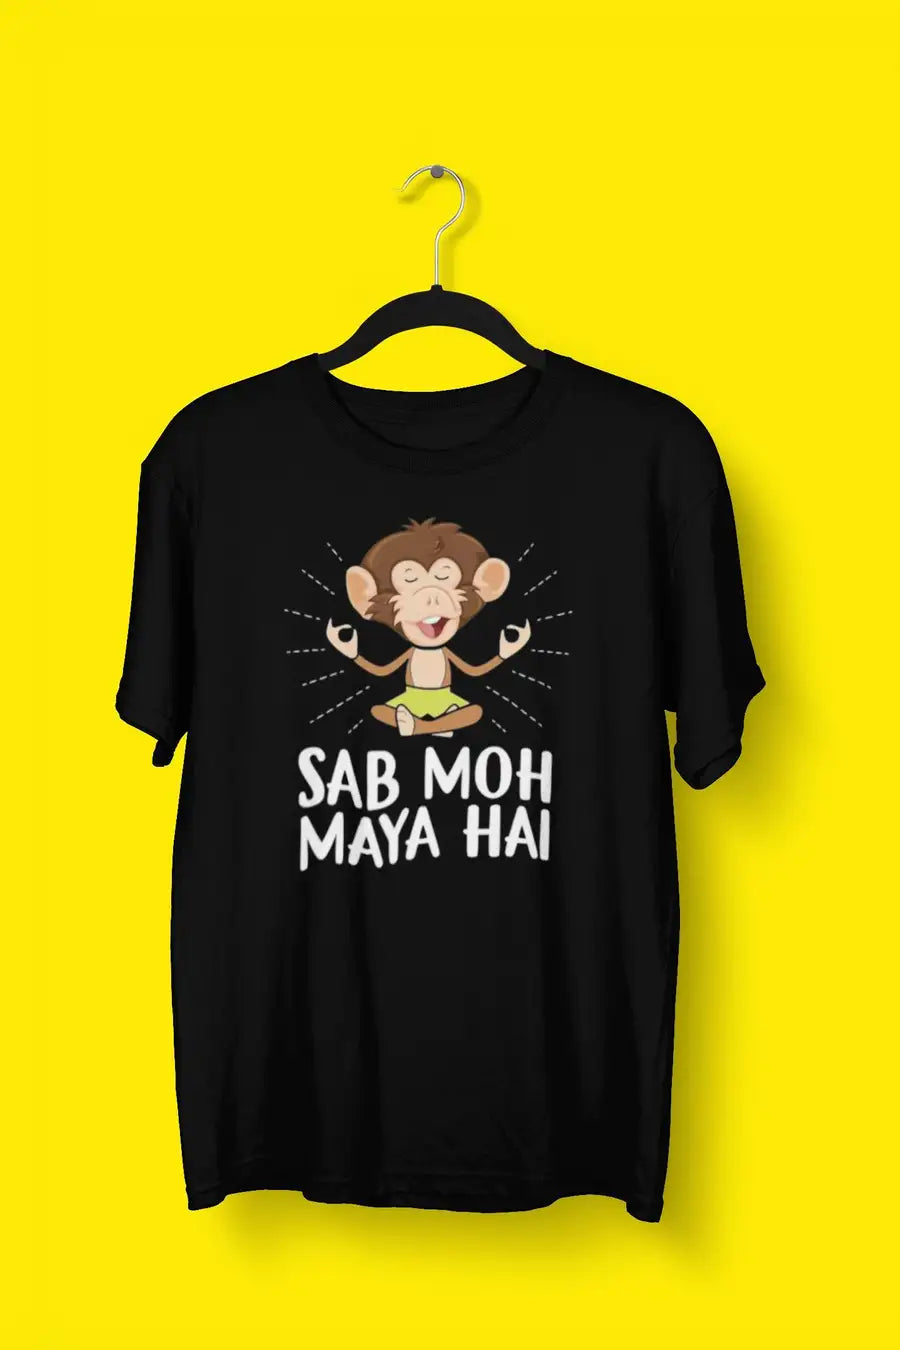 Sab Moh Maya Hai Funny T Shirts for Men | Premium Design | Catch My Drift India - Catch My Drift India Clothing black, bollywood, clothing, engineer, engineering, funny, made in india, shirt,